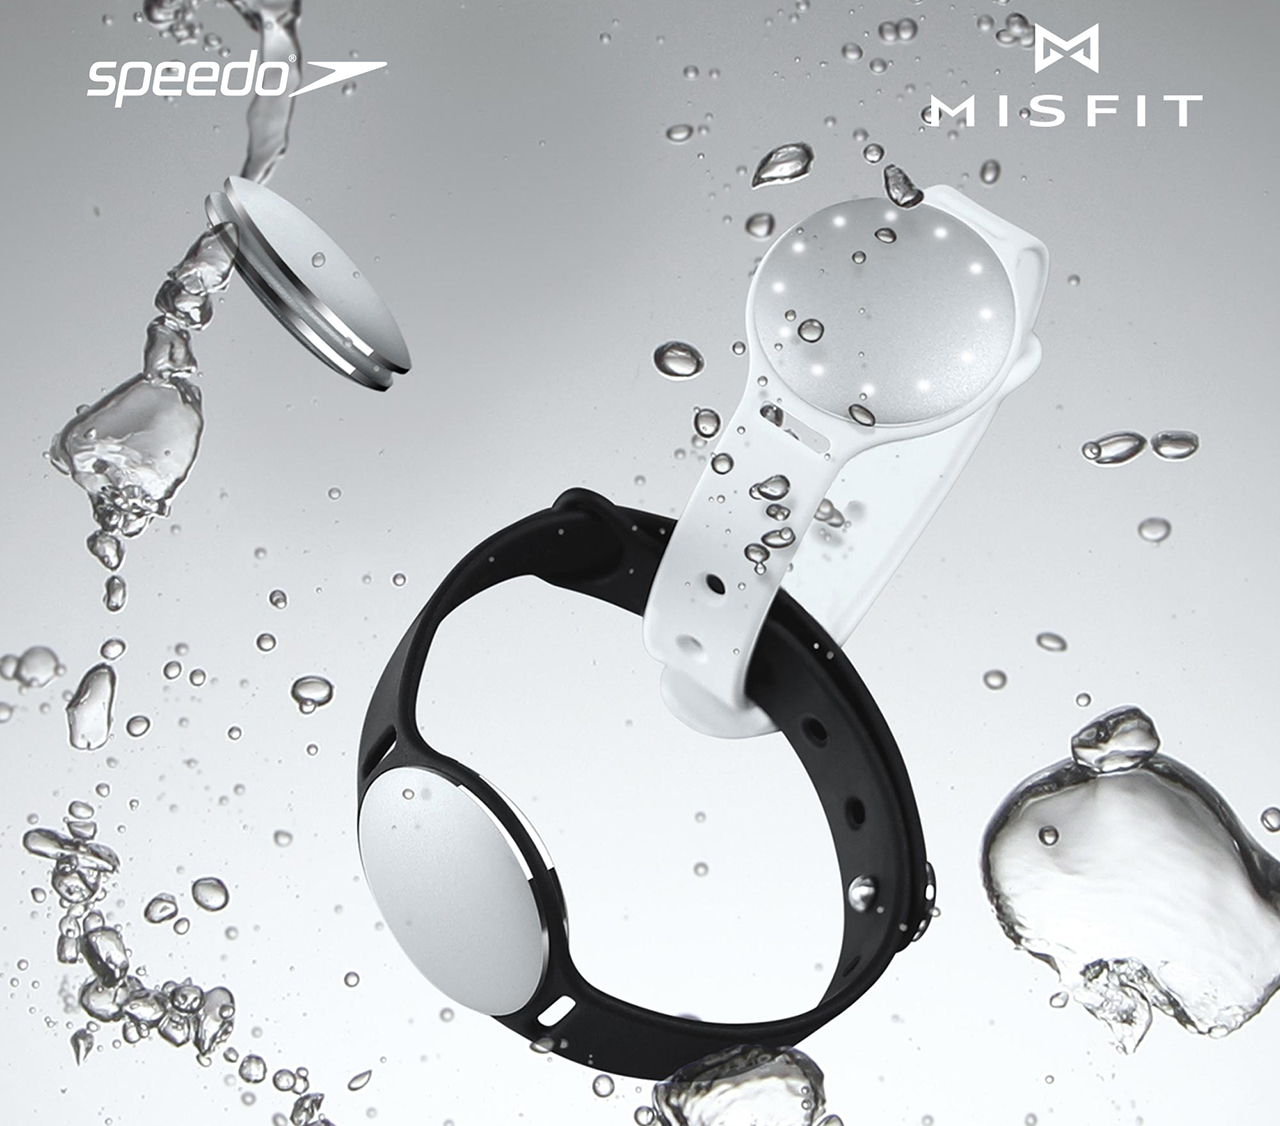 Speedo And Misfit Team Up For A Swimming-Focused Fitness Tracker